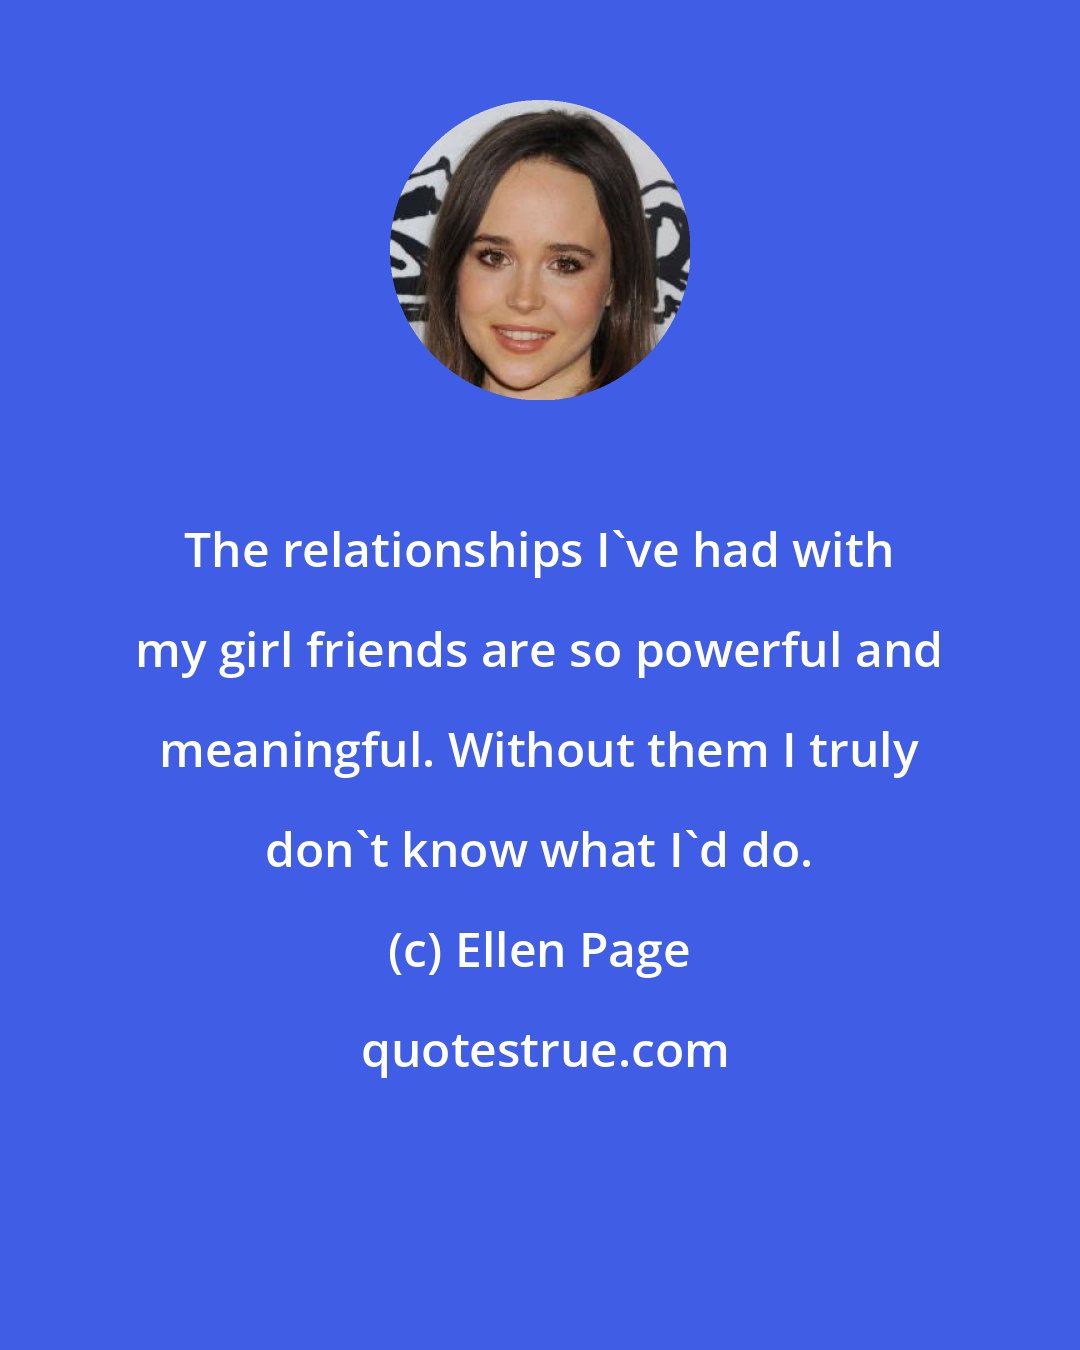 Ellen Page: The relationships I've had with my girl friends are so powerful and meaningful. Without them I truly don't know what I'd do.